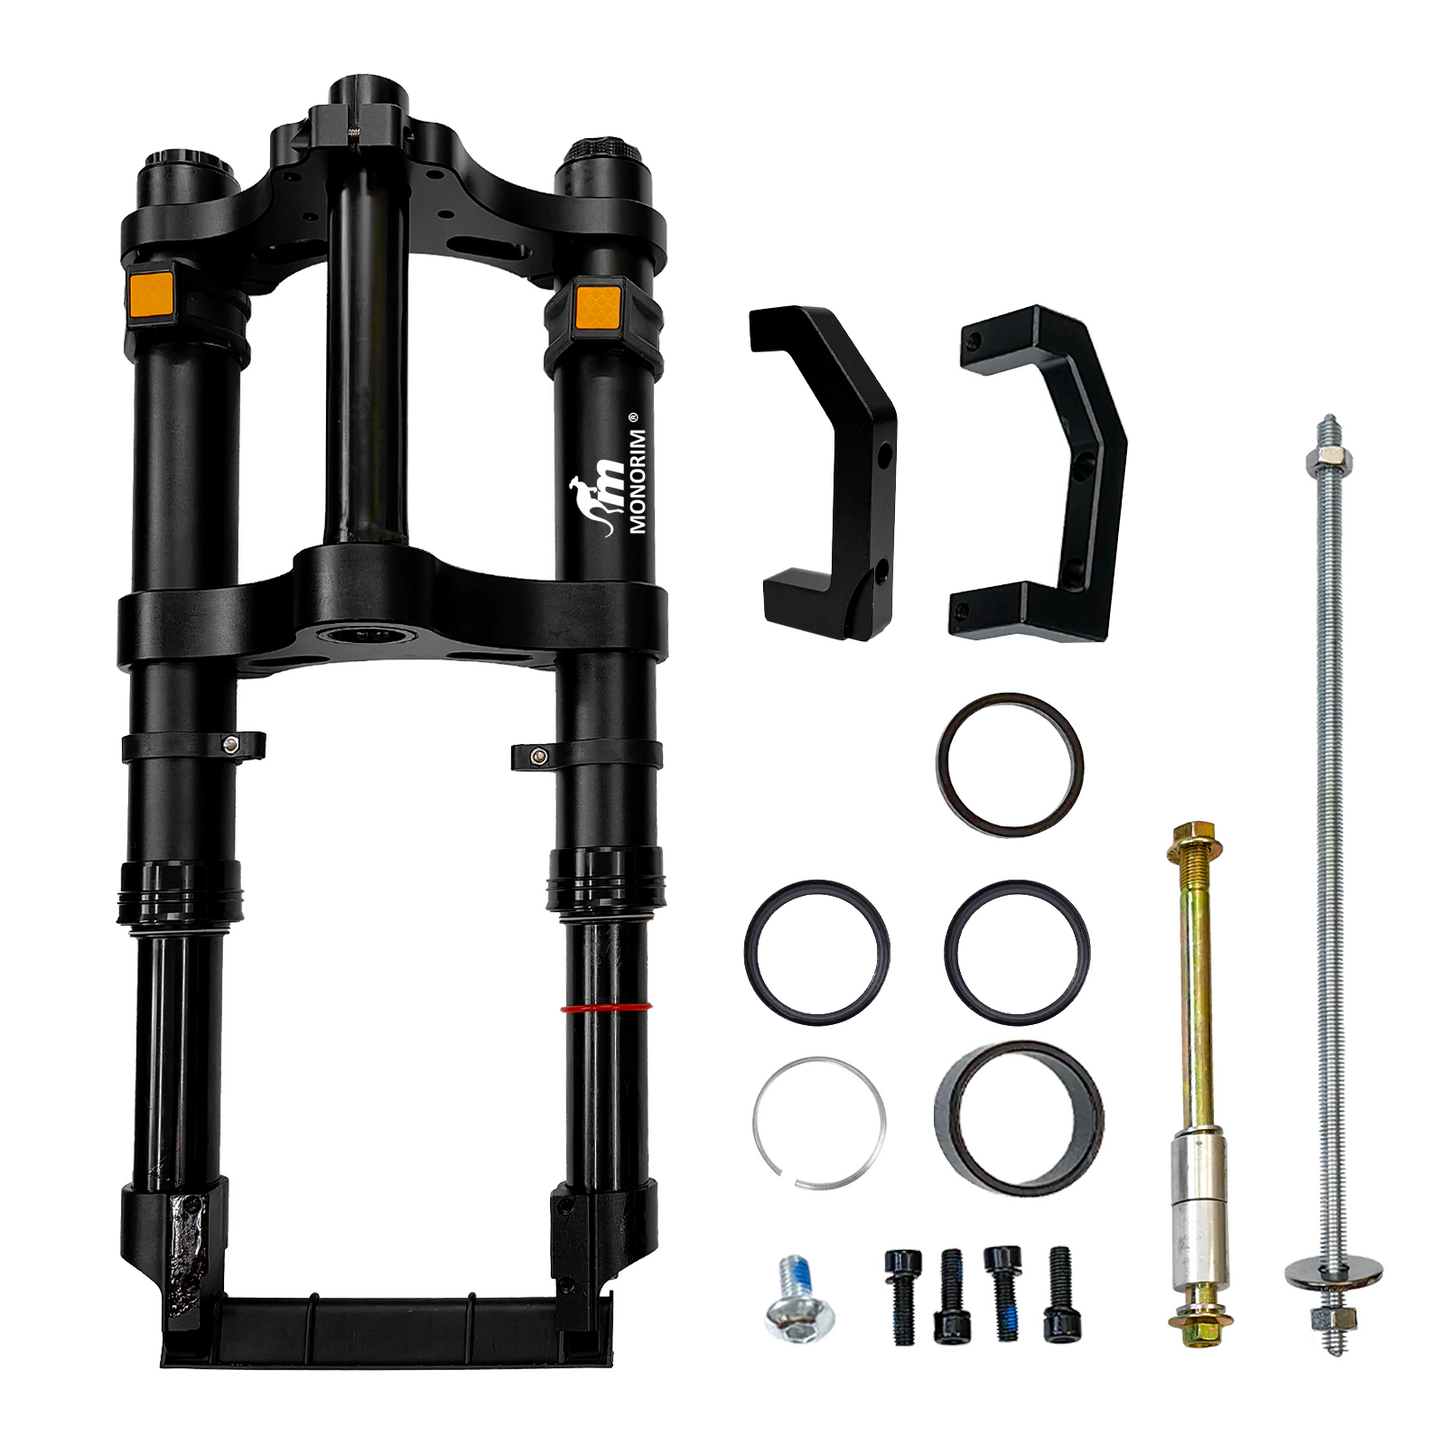 Monorim MB0 front air suspension modify great kit to be more safety and comfort for Engwe O14 ebike